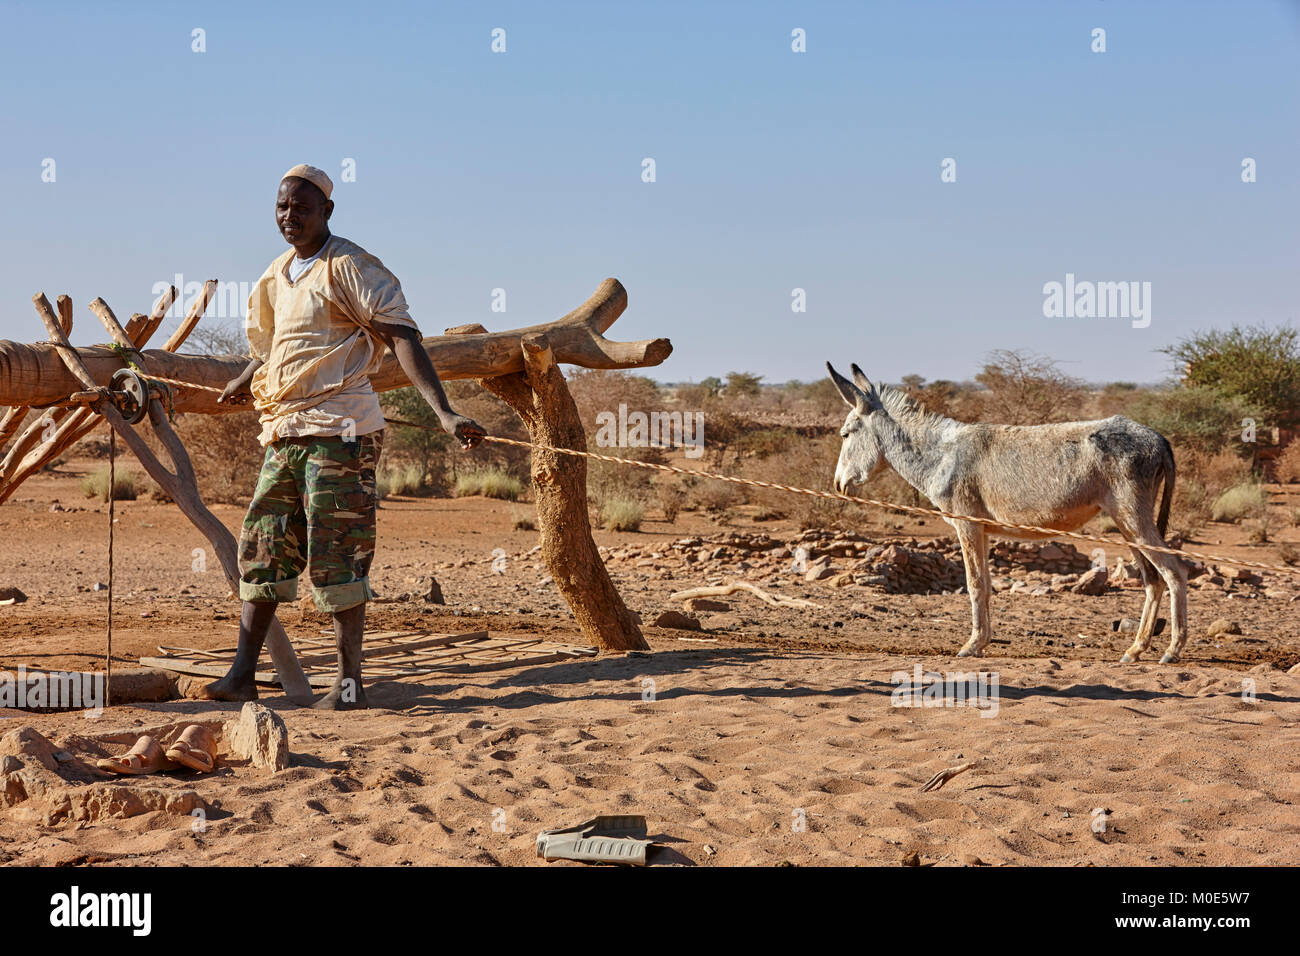 Man fetching water from a well with a donkey near Naqa, Sudan (North Sudan), Africa Stock Photo